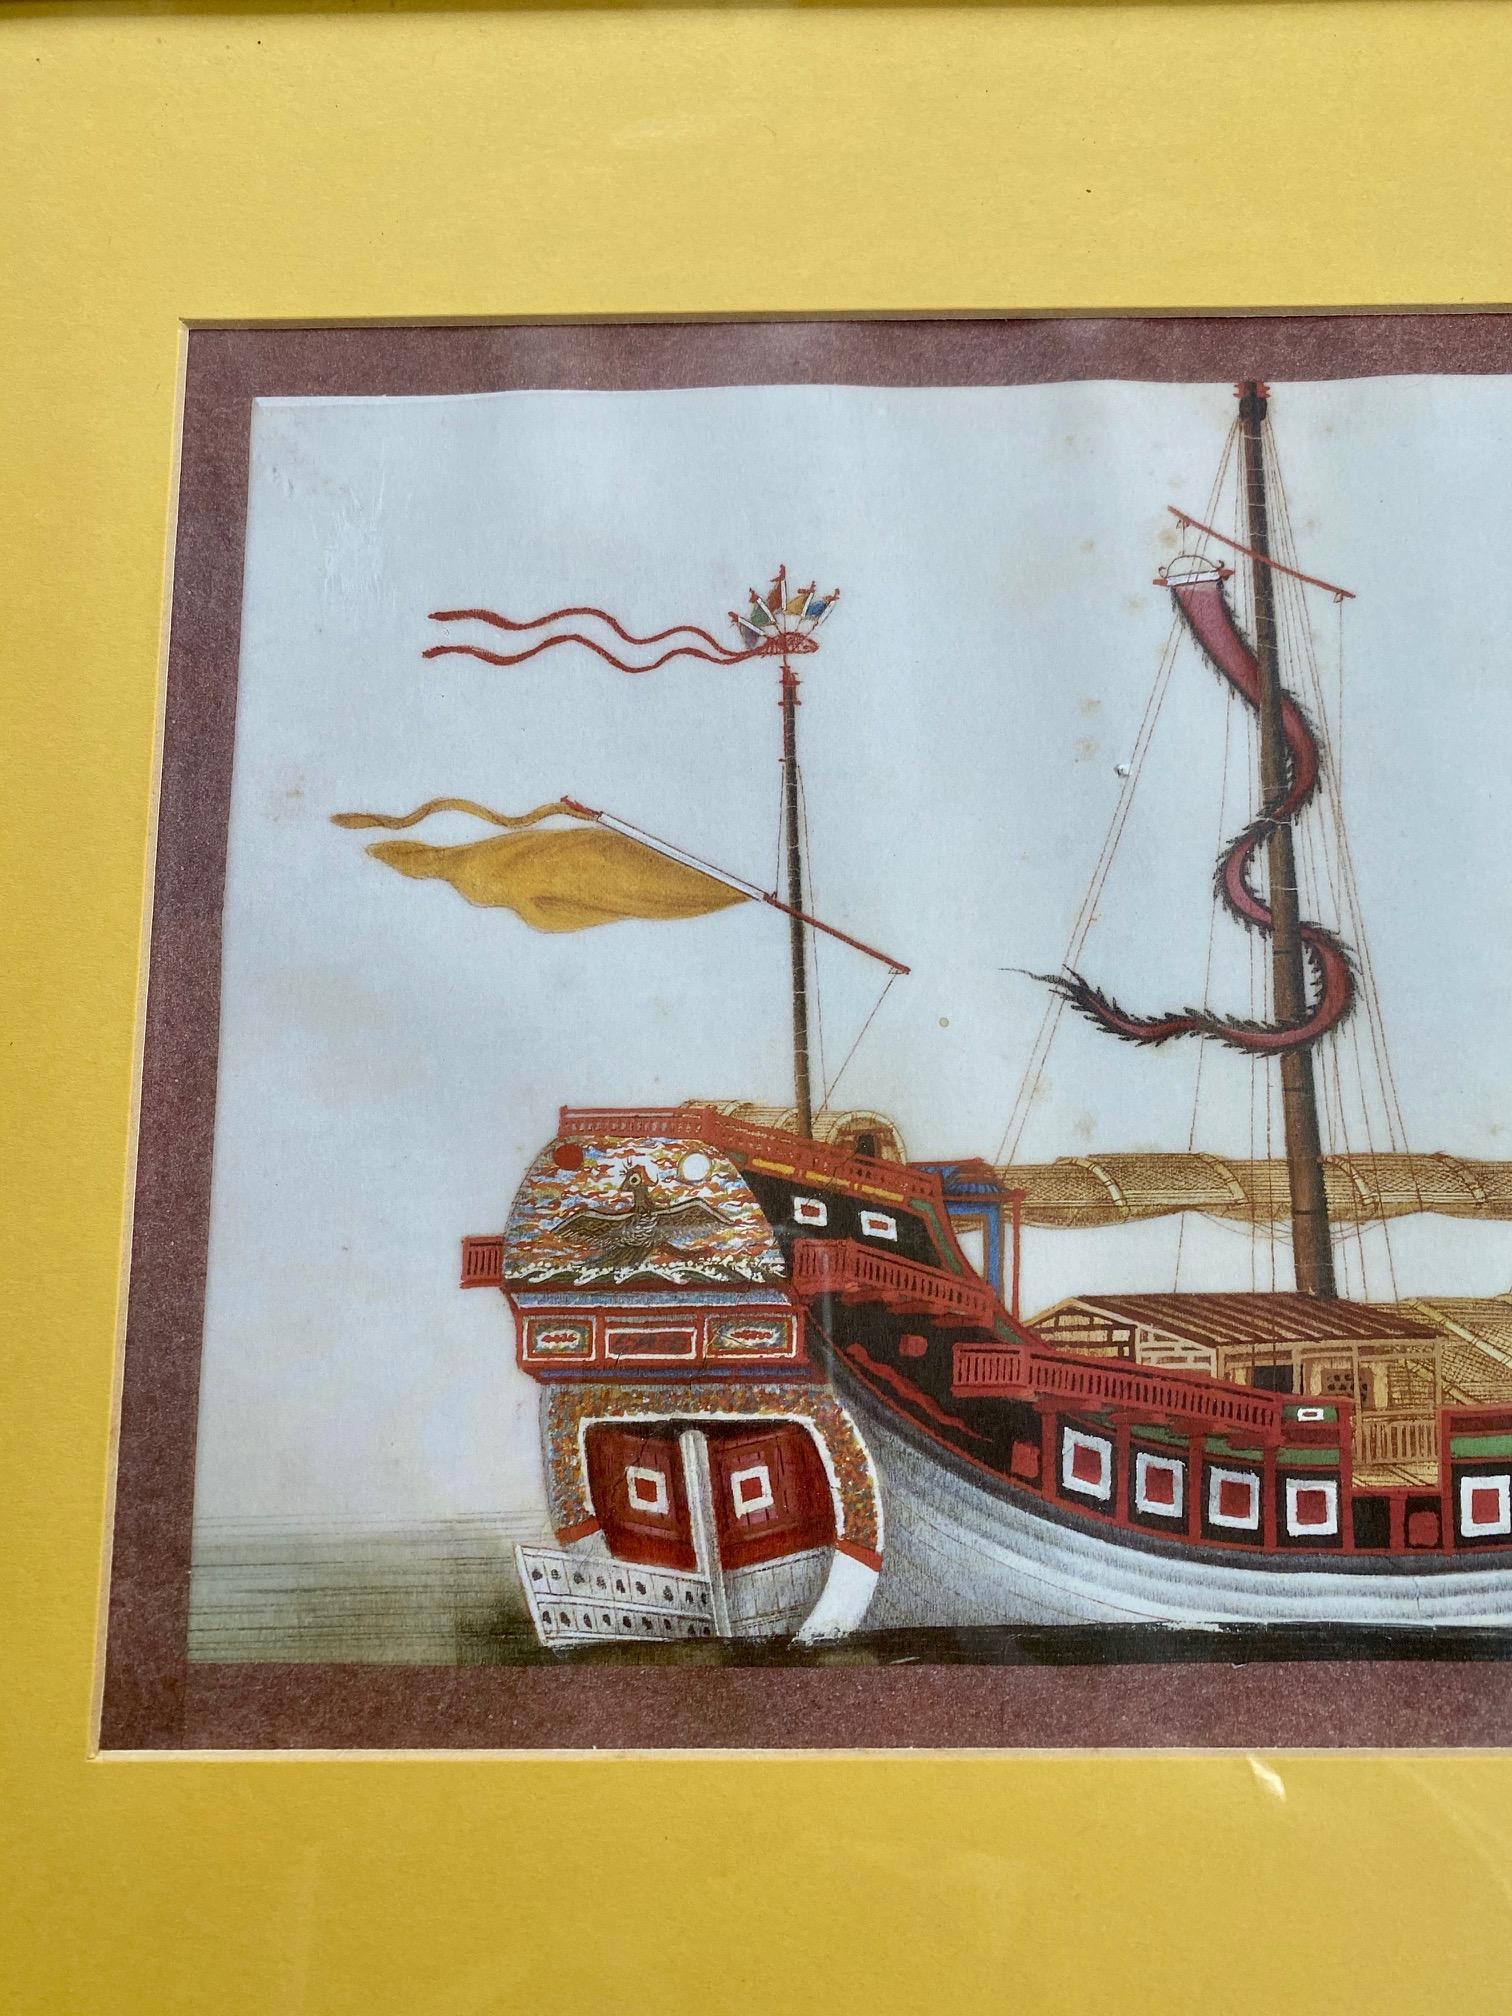 Early 19th century Chinese Export Pith Painting of a Junk, likely circa 1830s, having a very finely painted oil on pith paper view of an exquisite Junk with dramatic shear, elaborately carved gunnel and transom, decorative paintwork, furled sails,